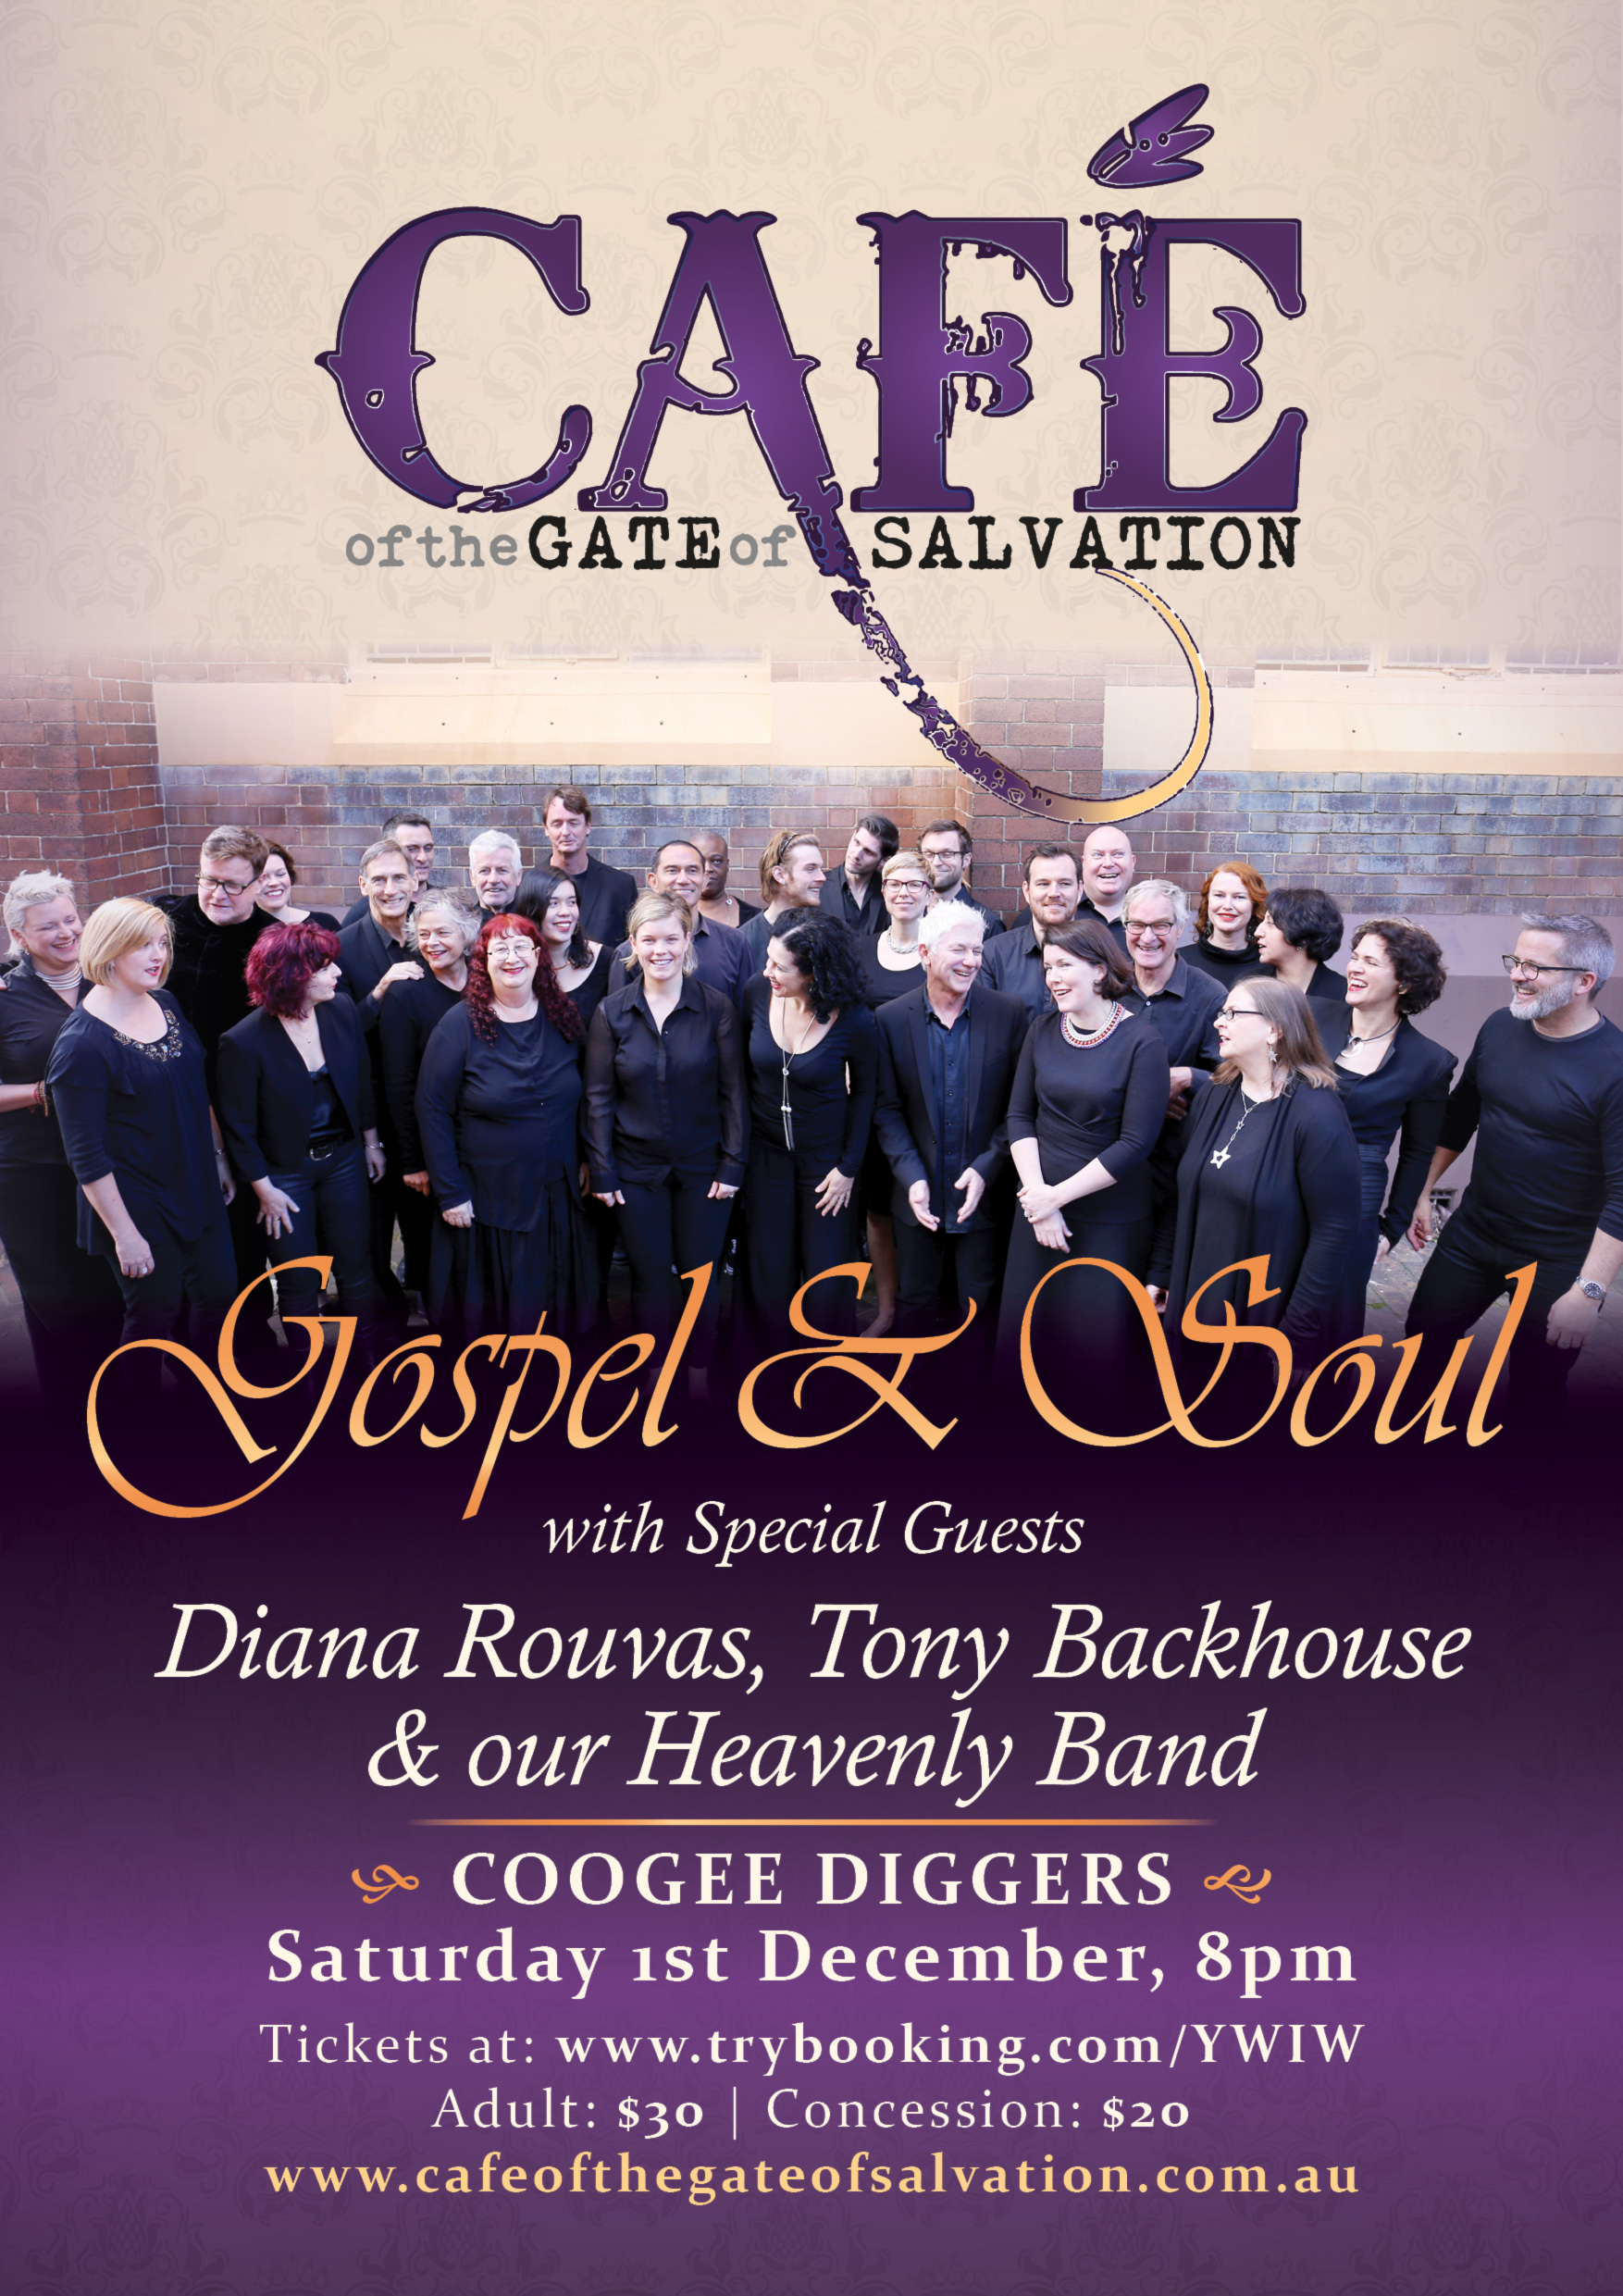 Café with Special Guests Diana Rouvas, Tony Backhouse & our Heavenly Band